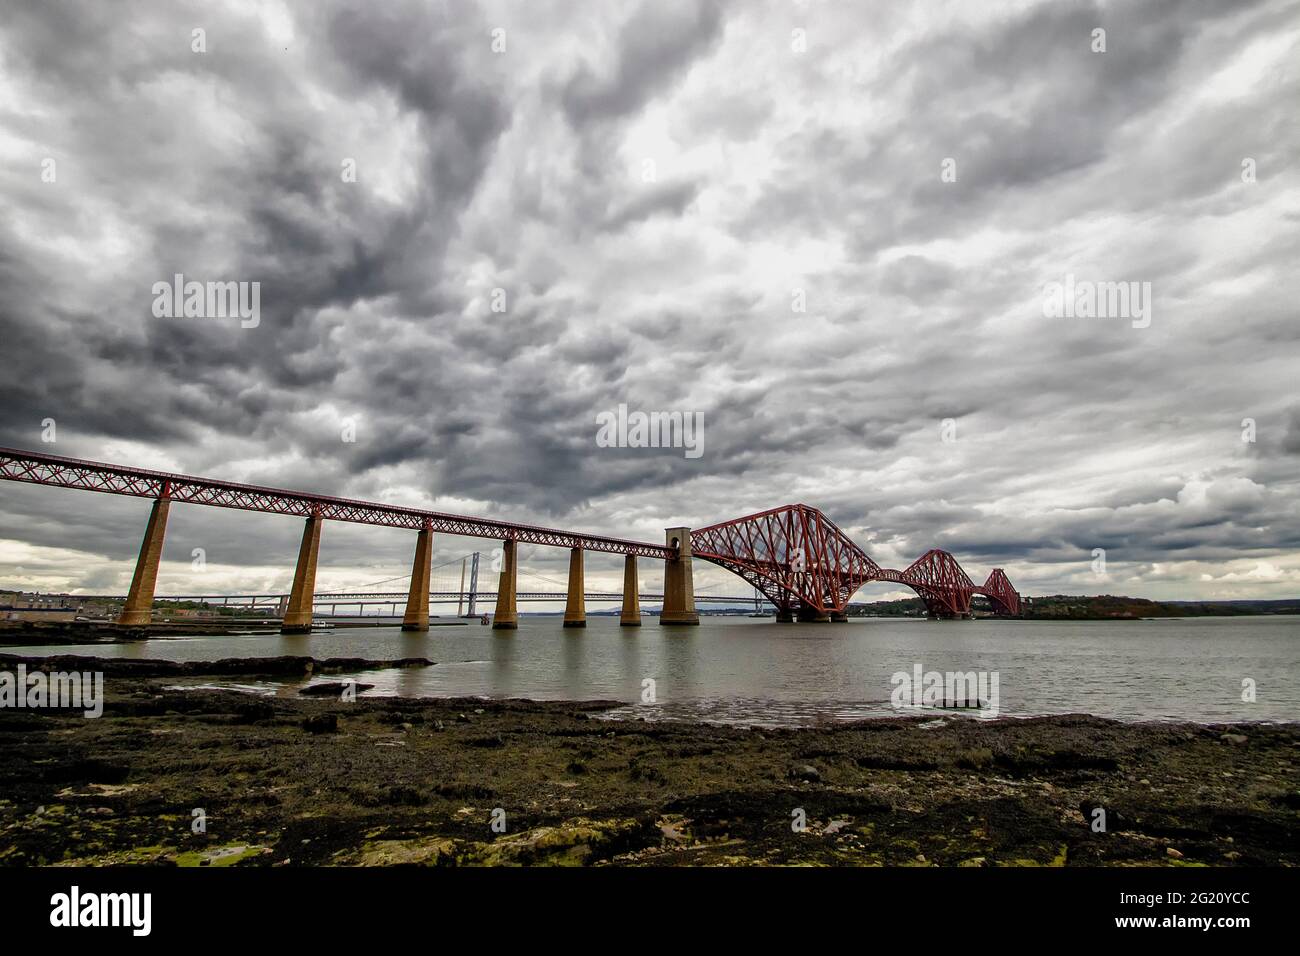 The Forth Bridges crossing the Firth of Forth at Queensferry, Edinburgh, Scotland Stock Photo